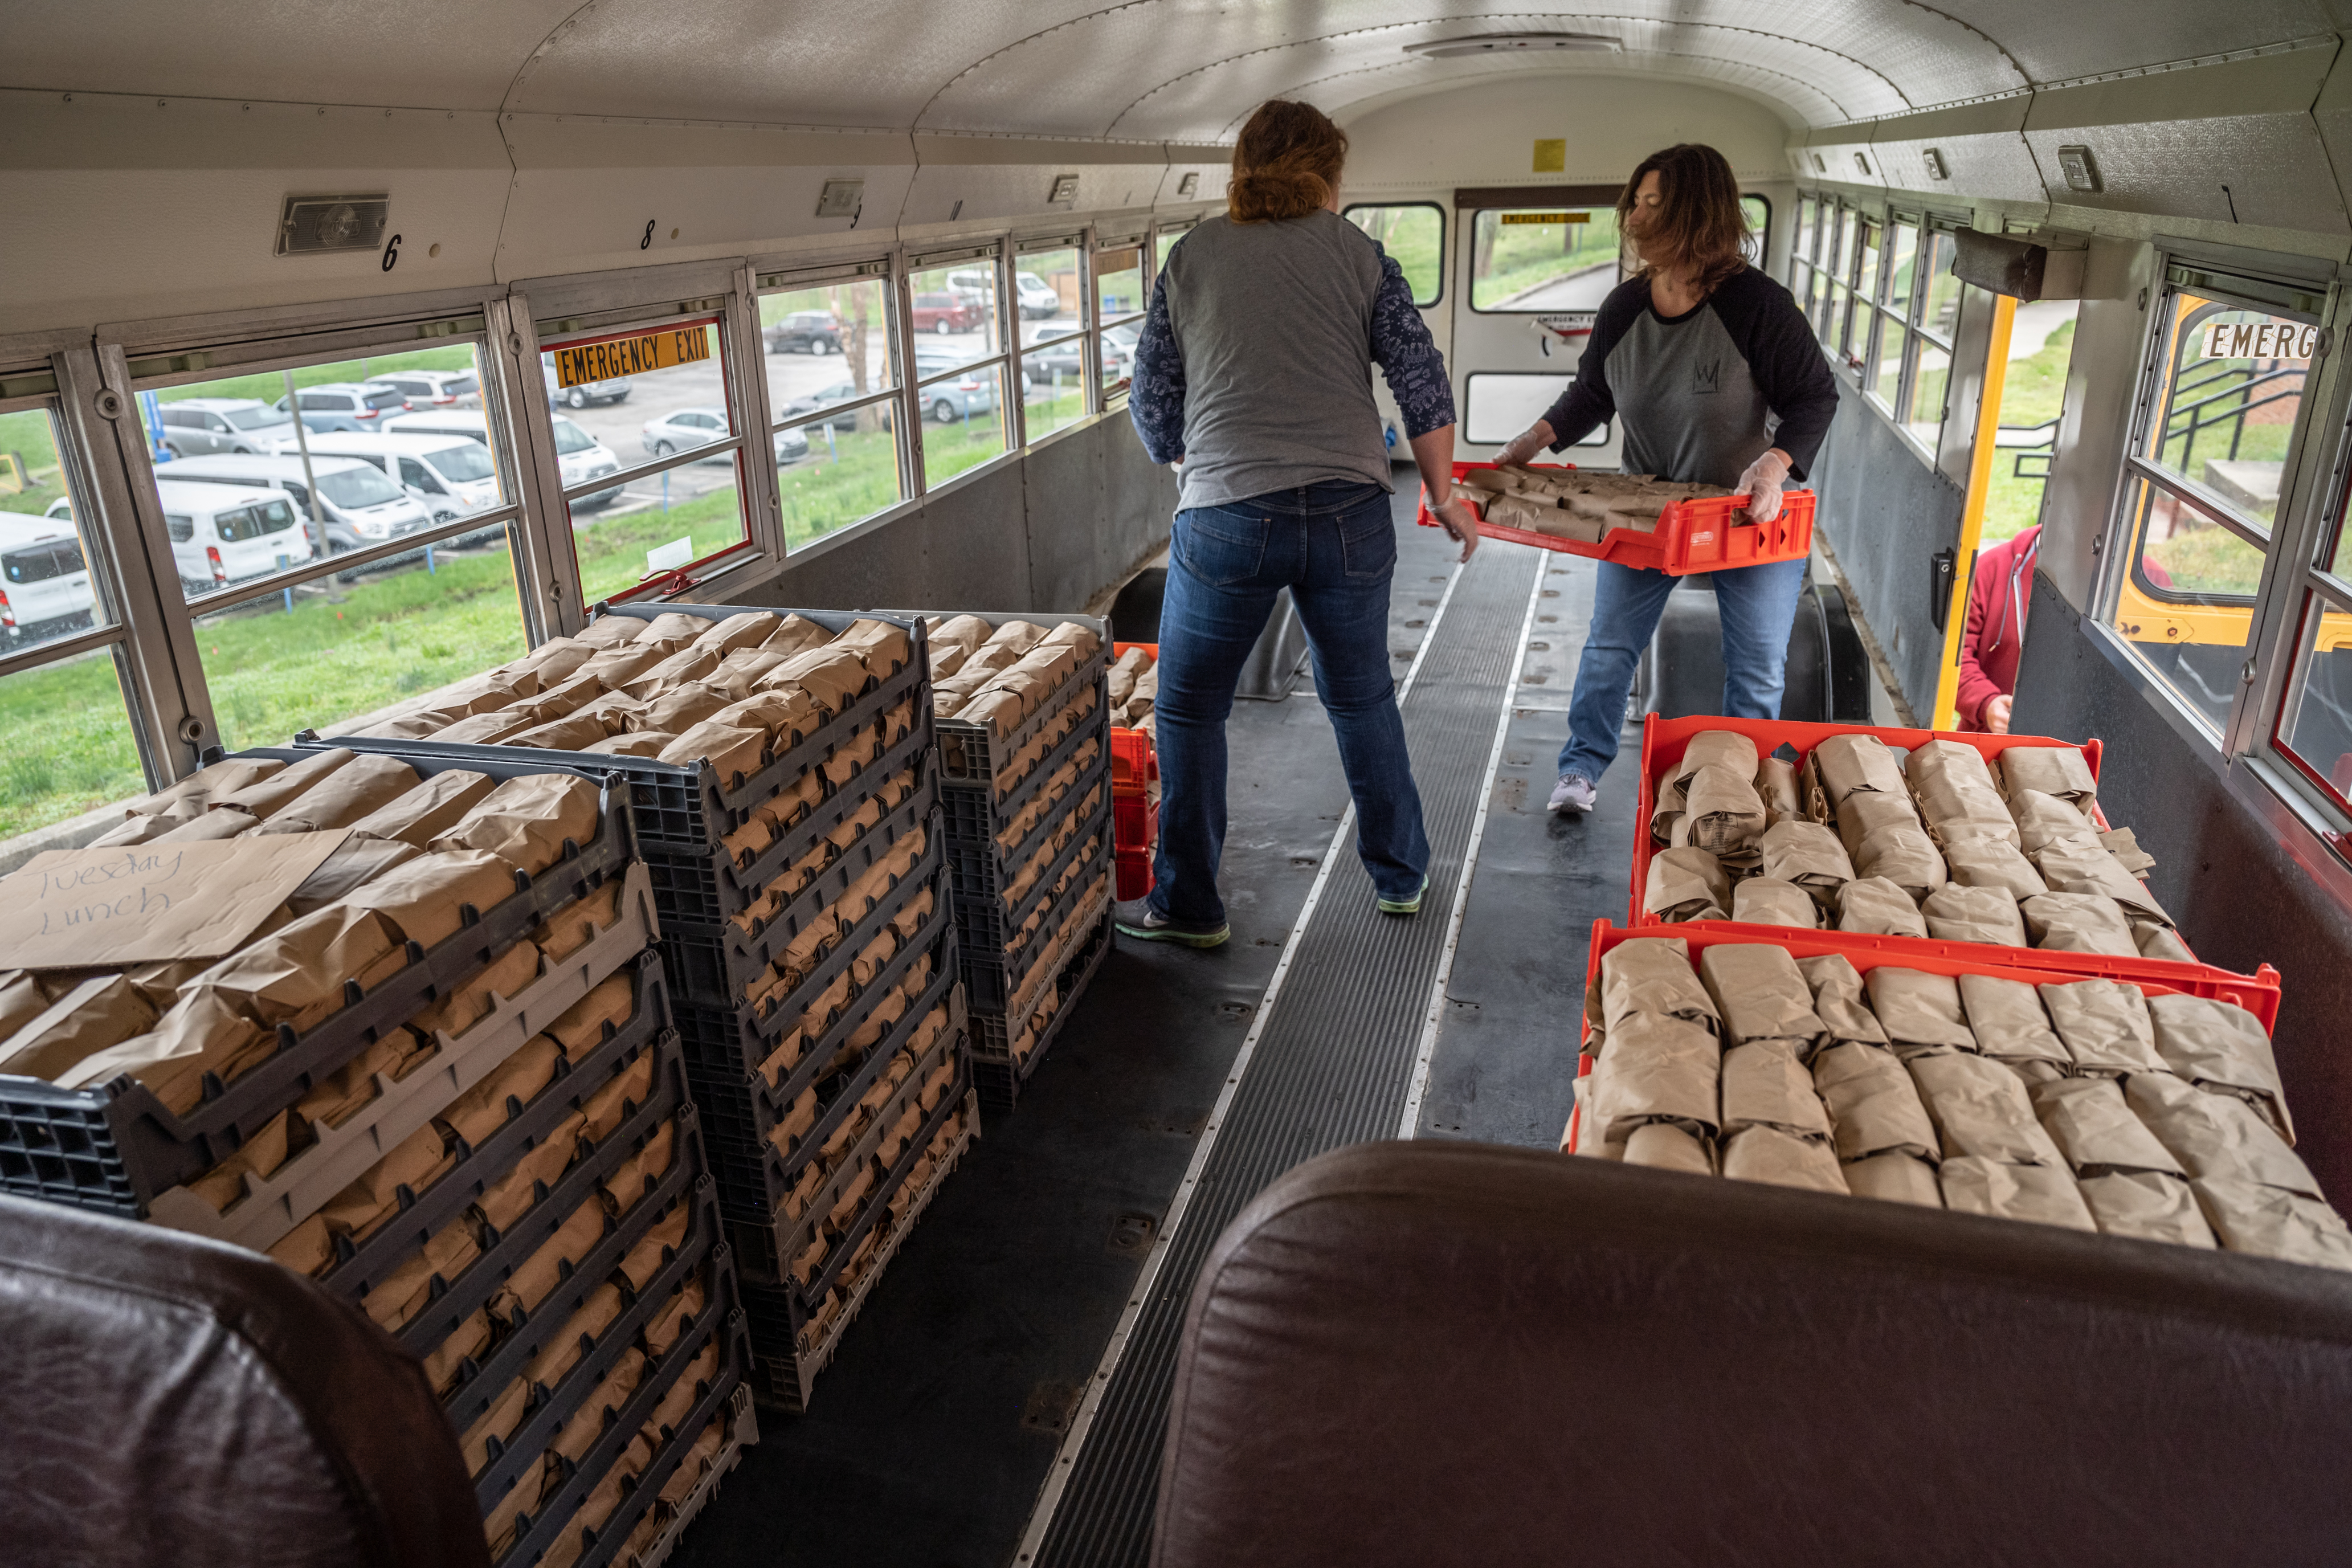 The Berea Kids Eat program, which is part of the college's Grow Appalachia initiative, is feeding students in a district with a 70% free-and-reduced lunch rate.